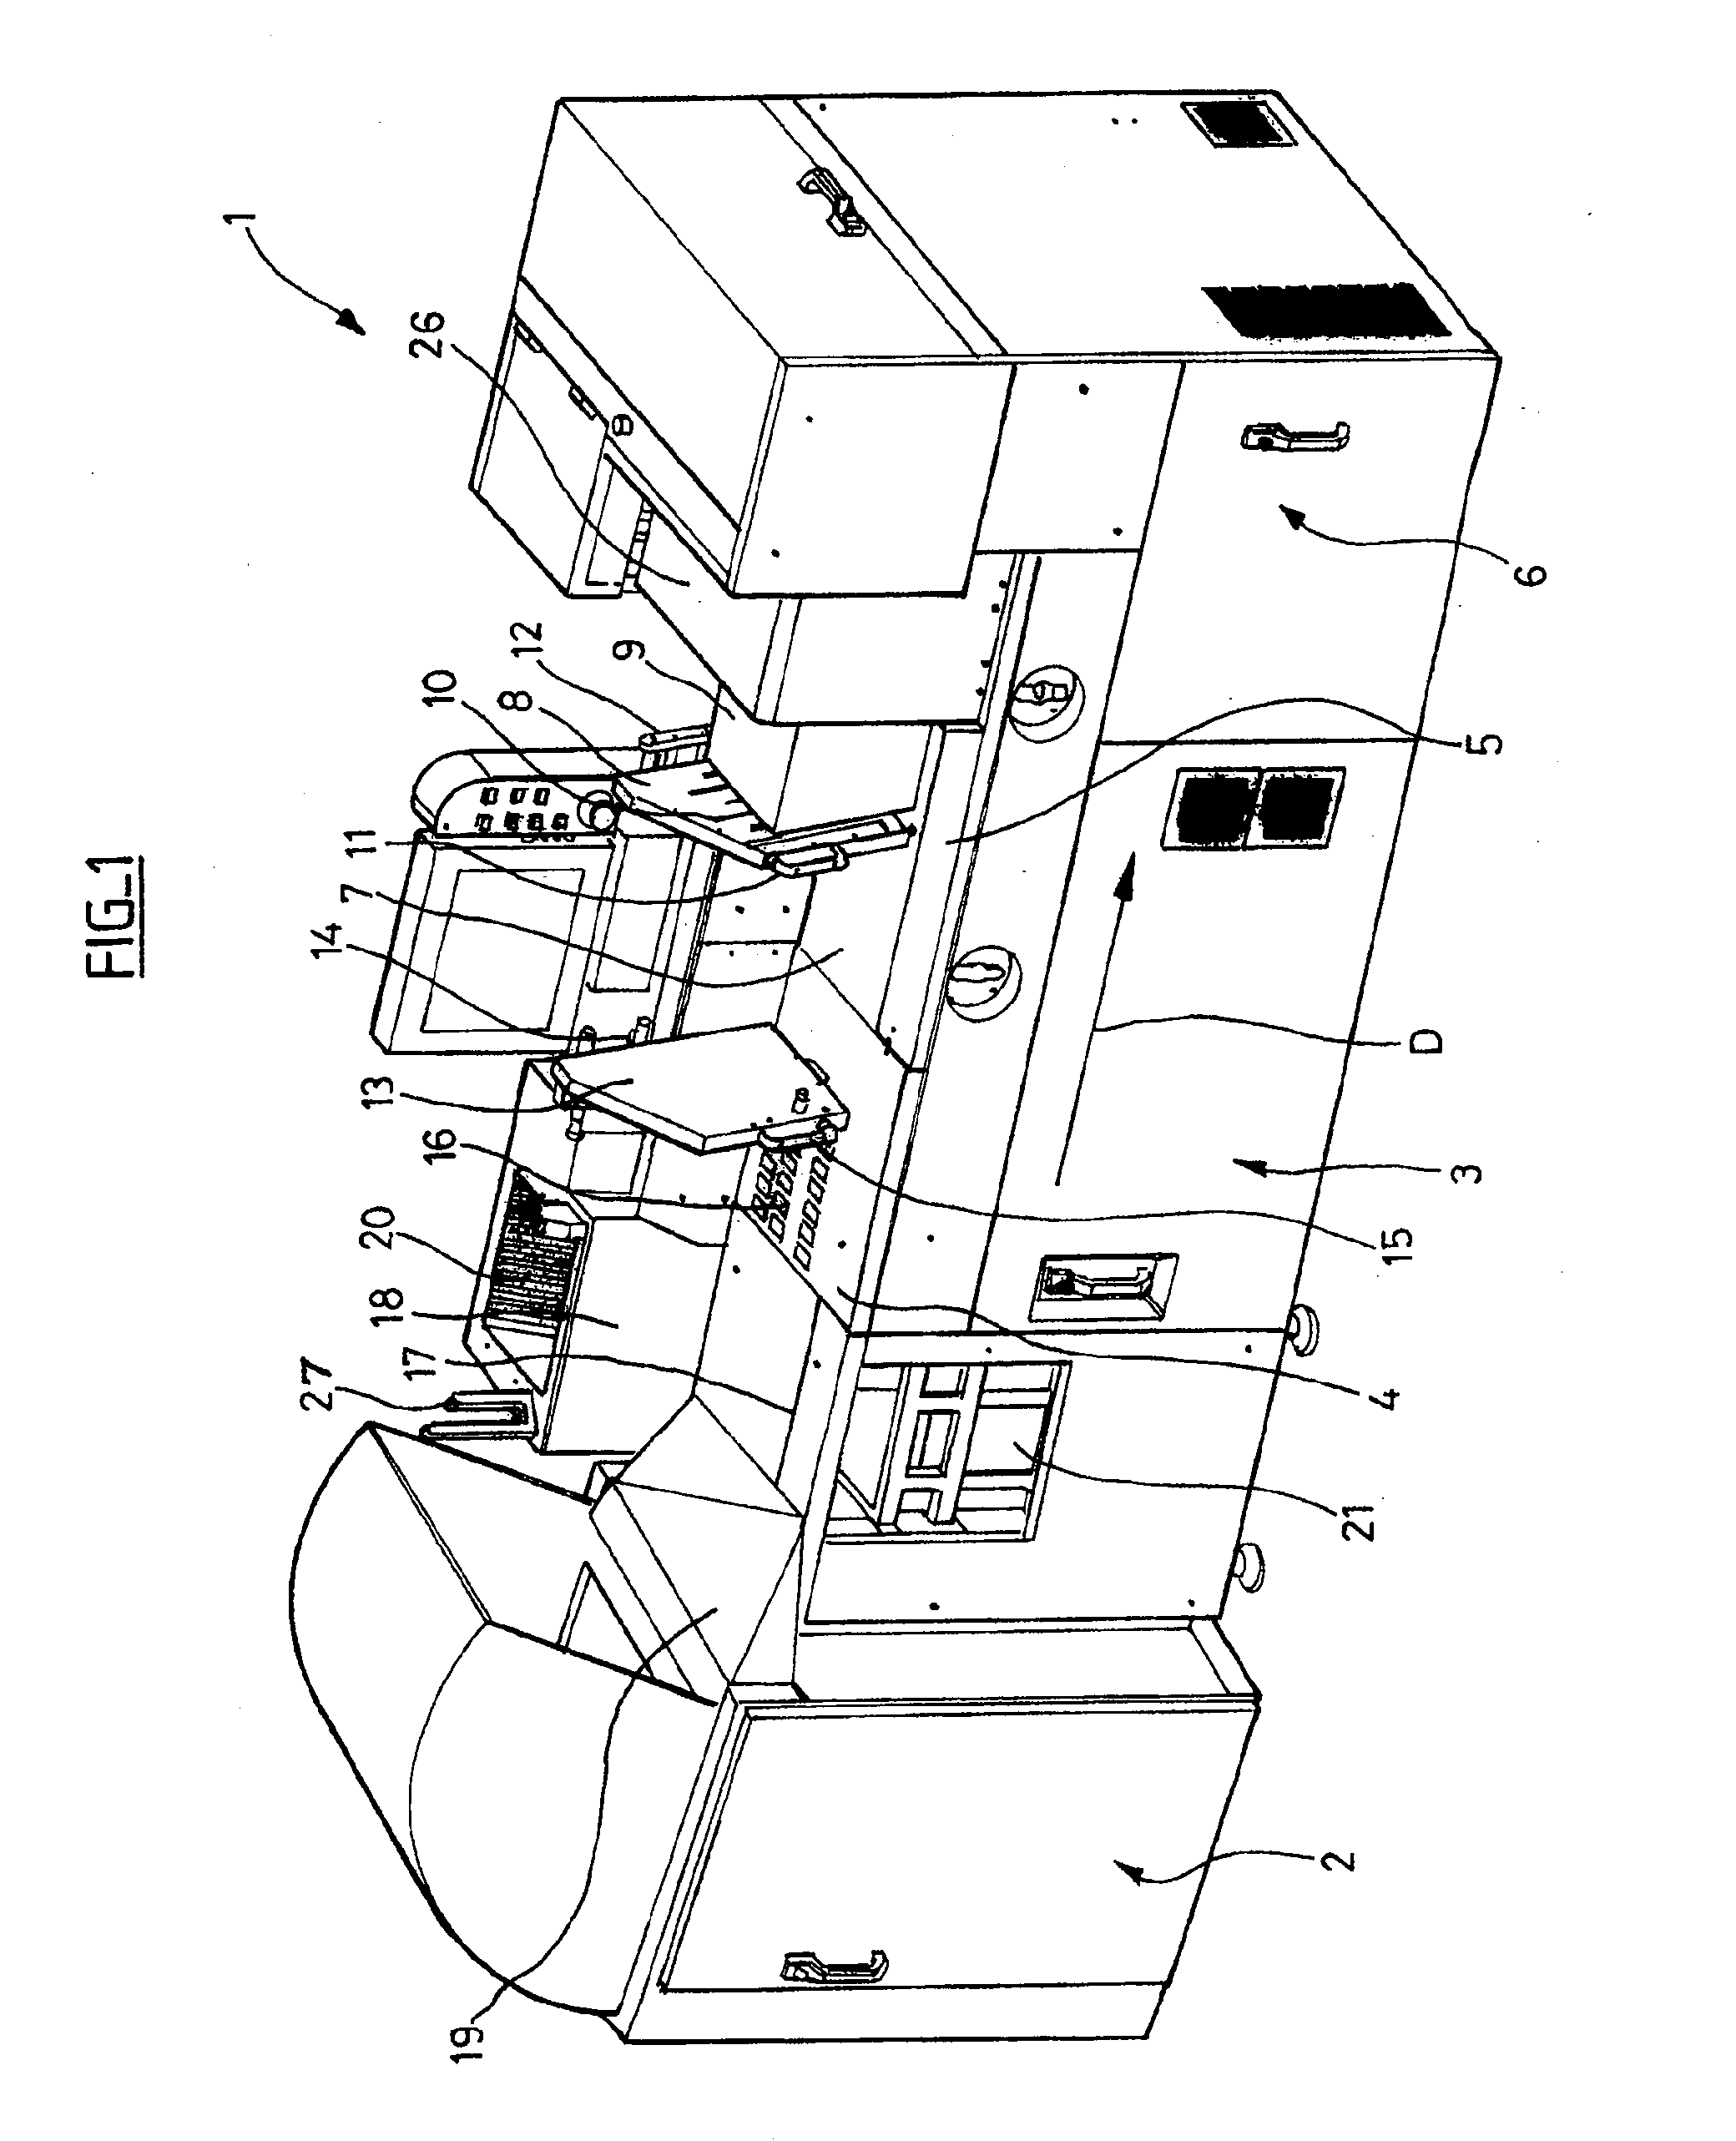 Method of Feeding Unstacker Apparatus For Unstacking Postal Items